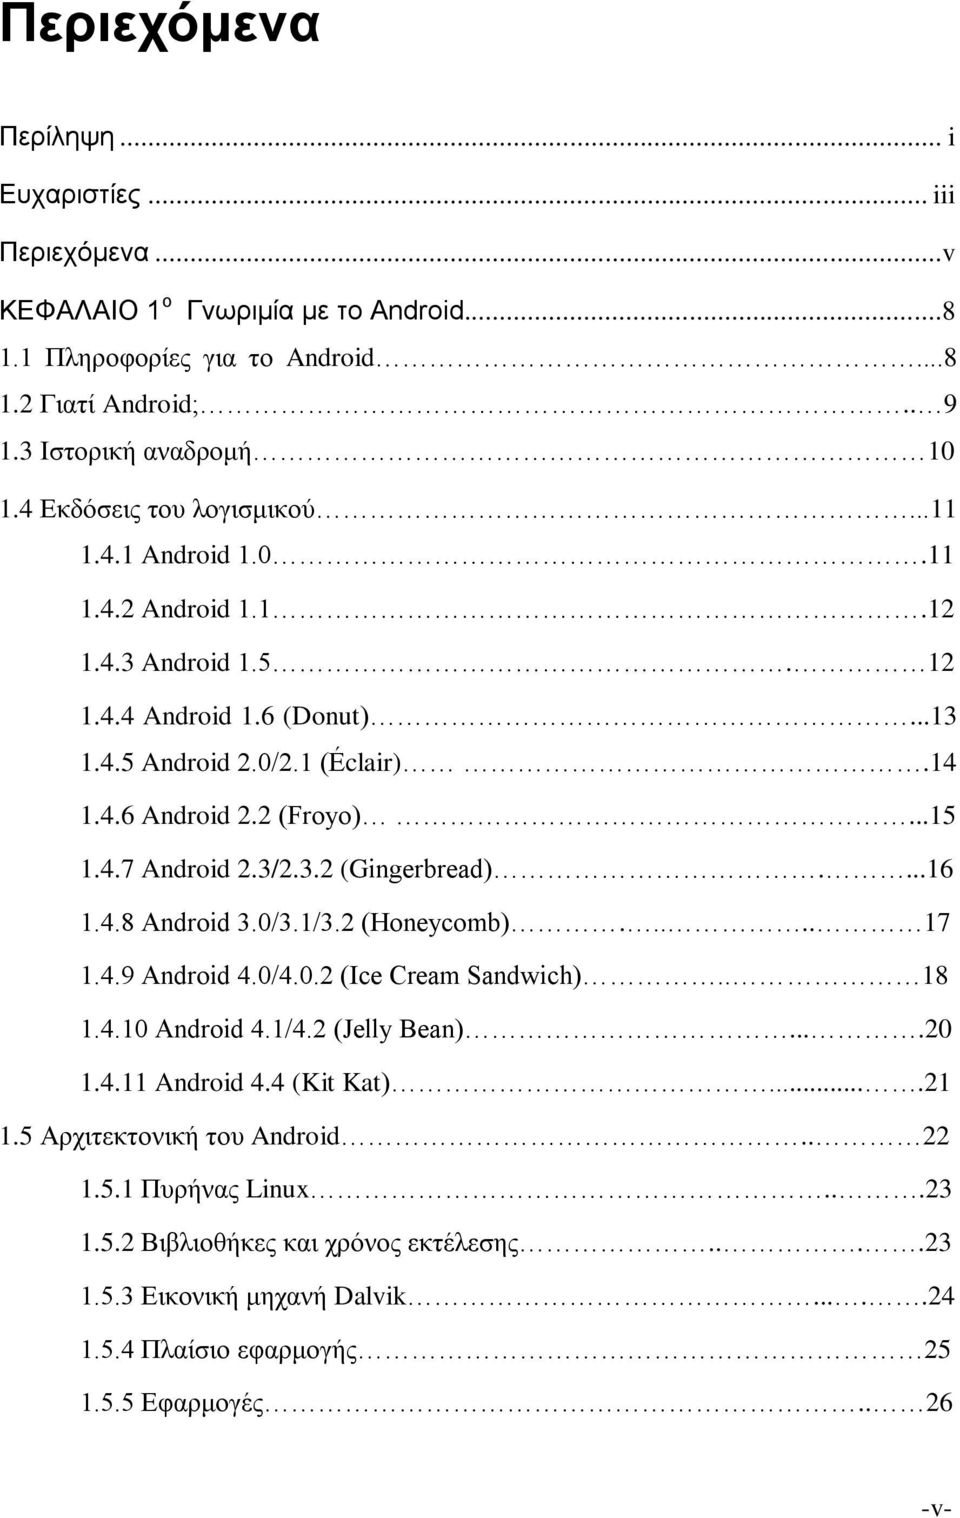 3/2.3.2 (Gingerbread)....16 1.4.8 Android 3.0/3.1/3.2 (Honeycomb)..... 17 1.4.9 Android 4.0/4.0.2 (Ice Cream Sandwich).. 18 1.4.10 Android 4.1/4.2 (Jelly Bean)....20 1.4.11 Android 4.4 (Kit Kat).